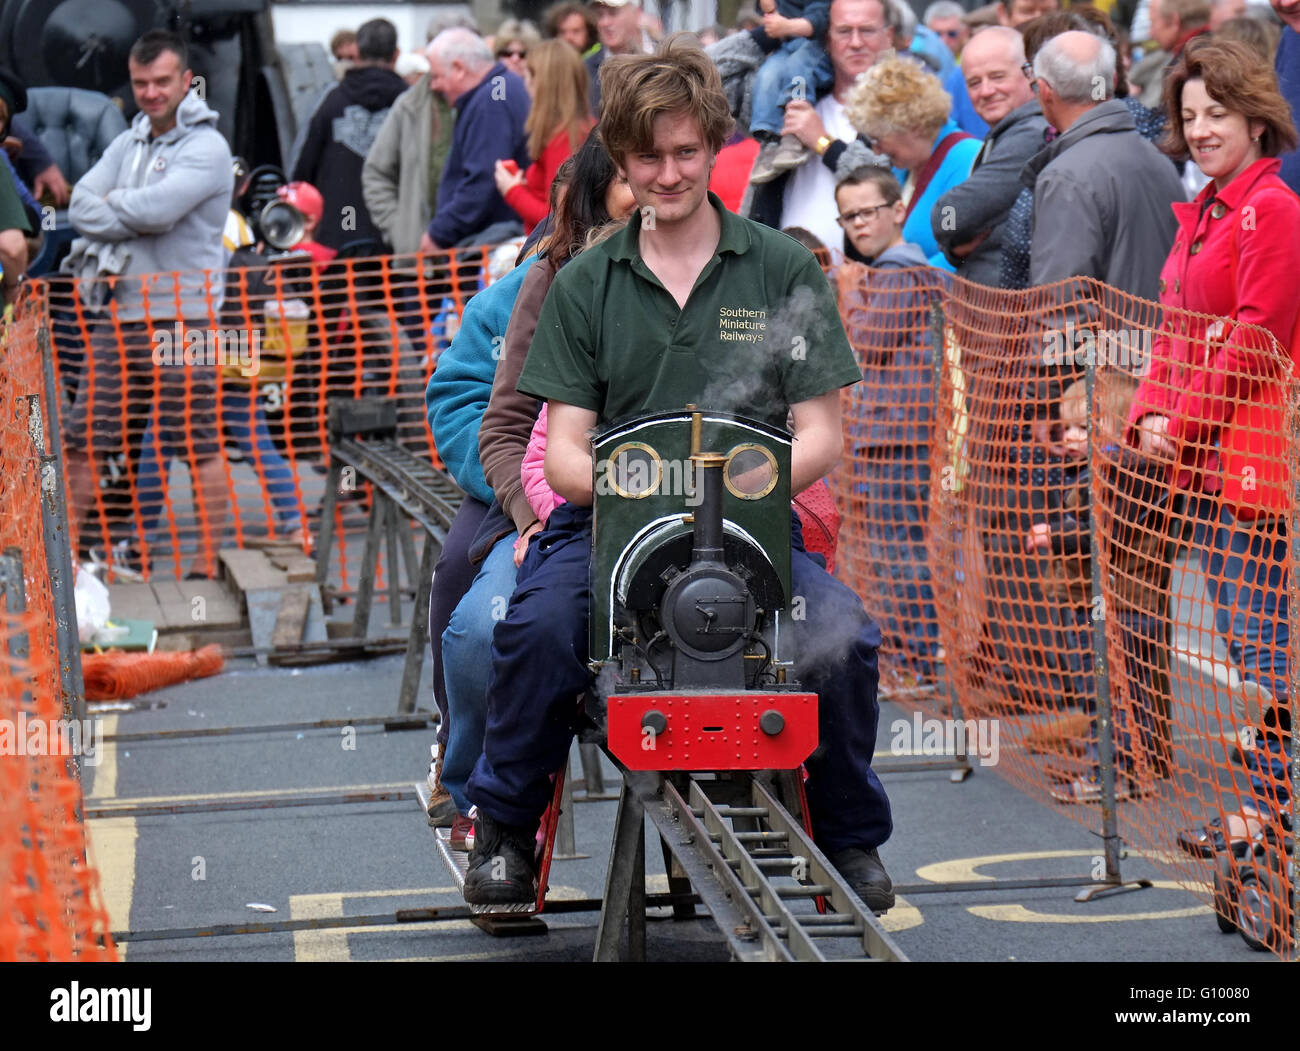 A young man driving a Model steam engine at a fair in Cornwall, UK Stock Photo